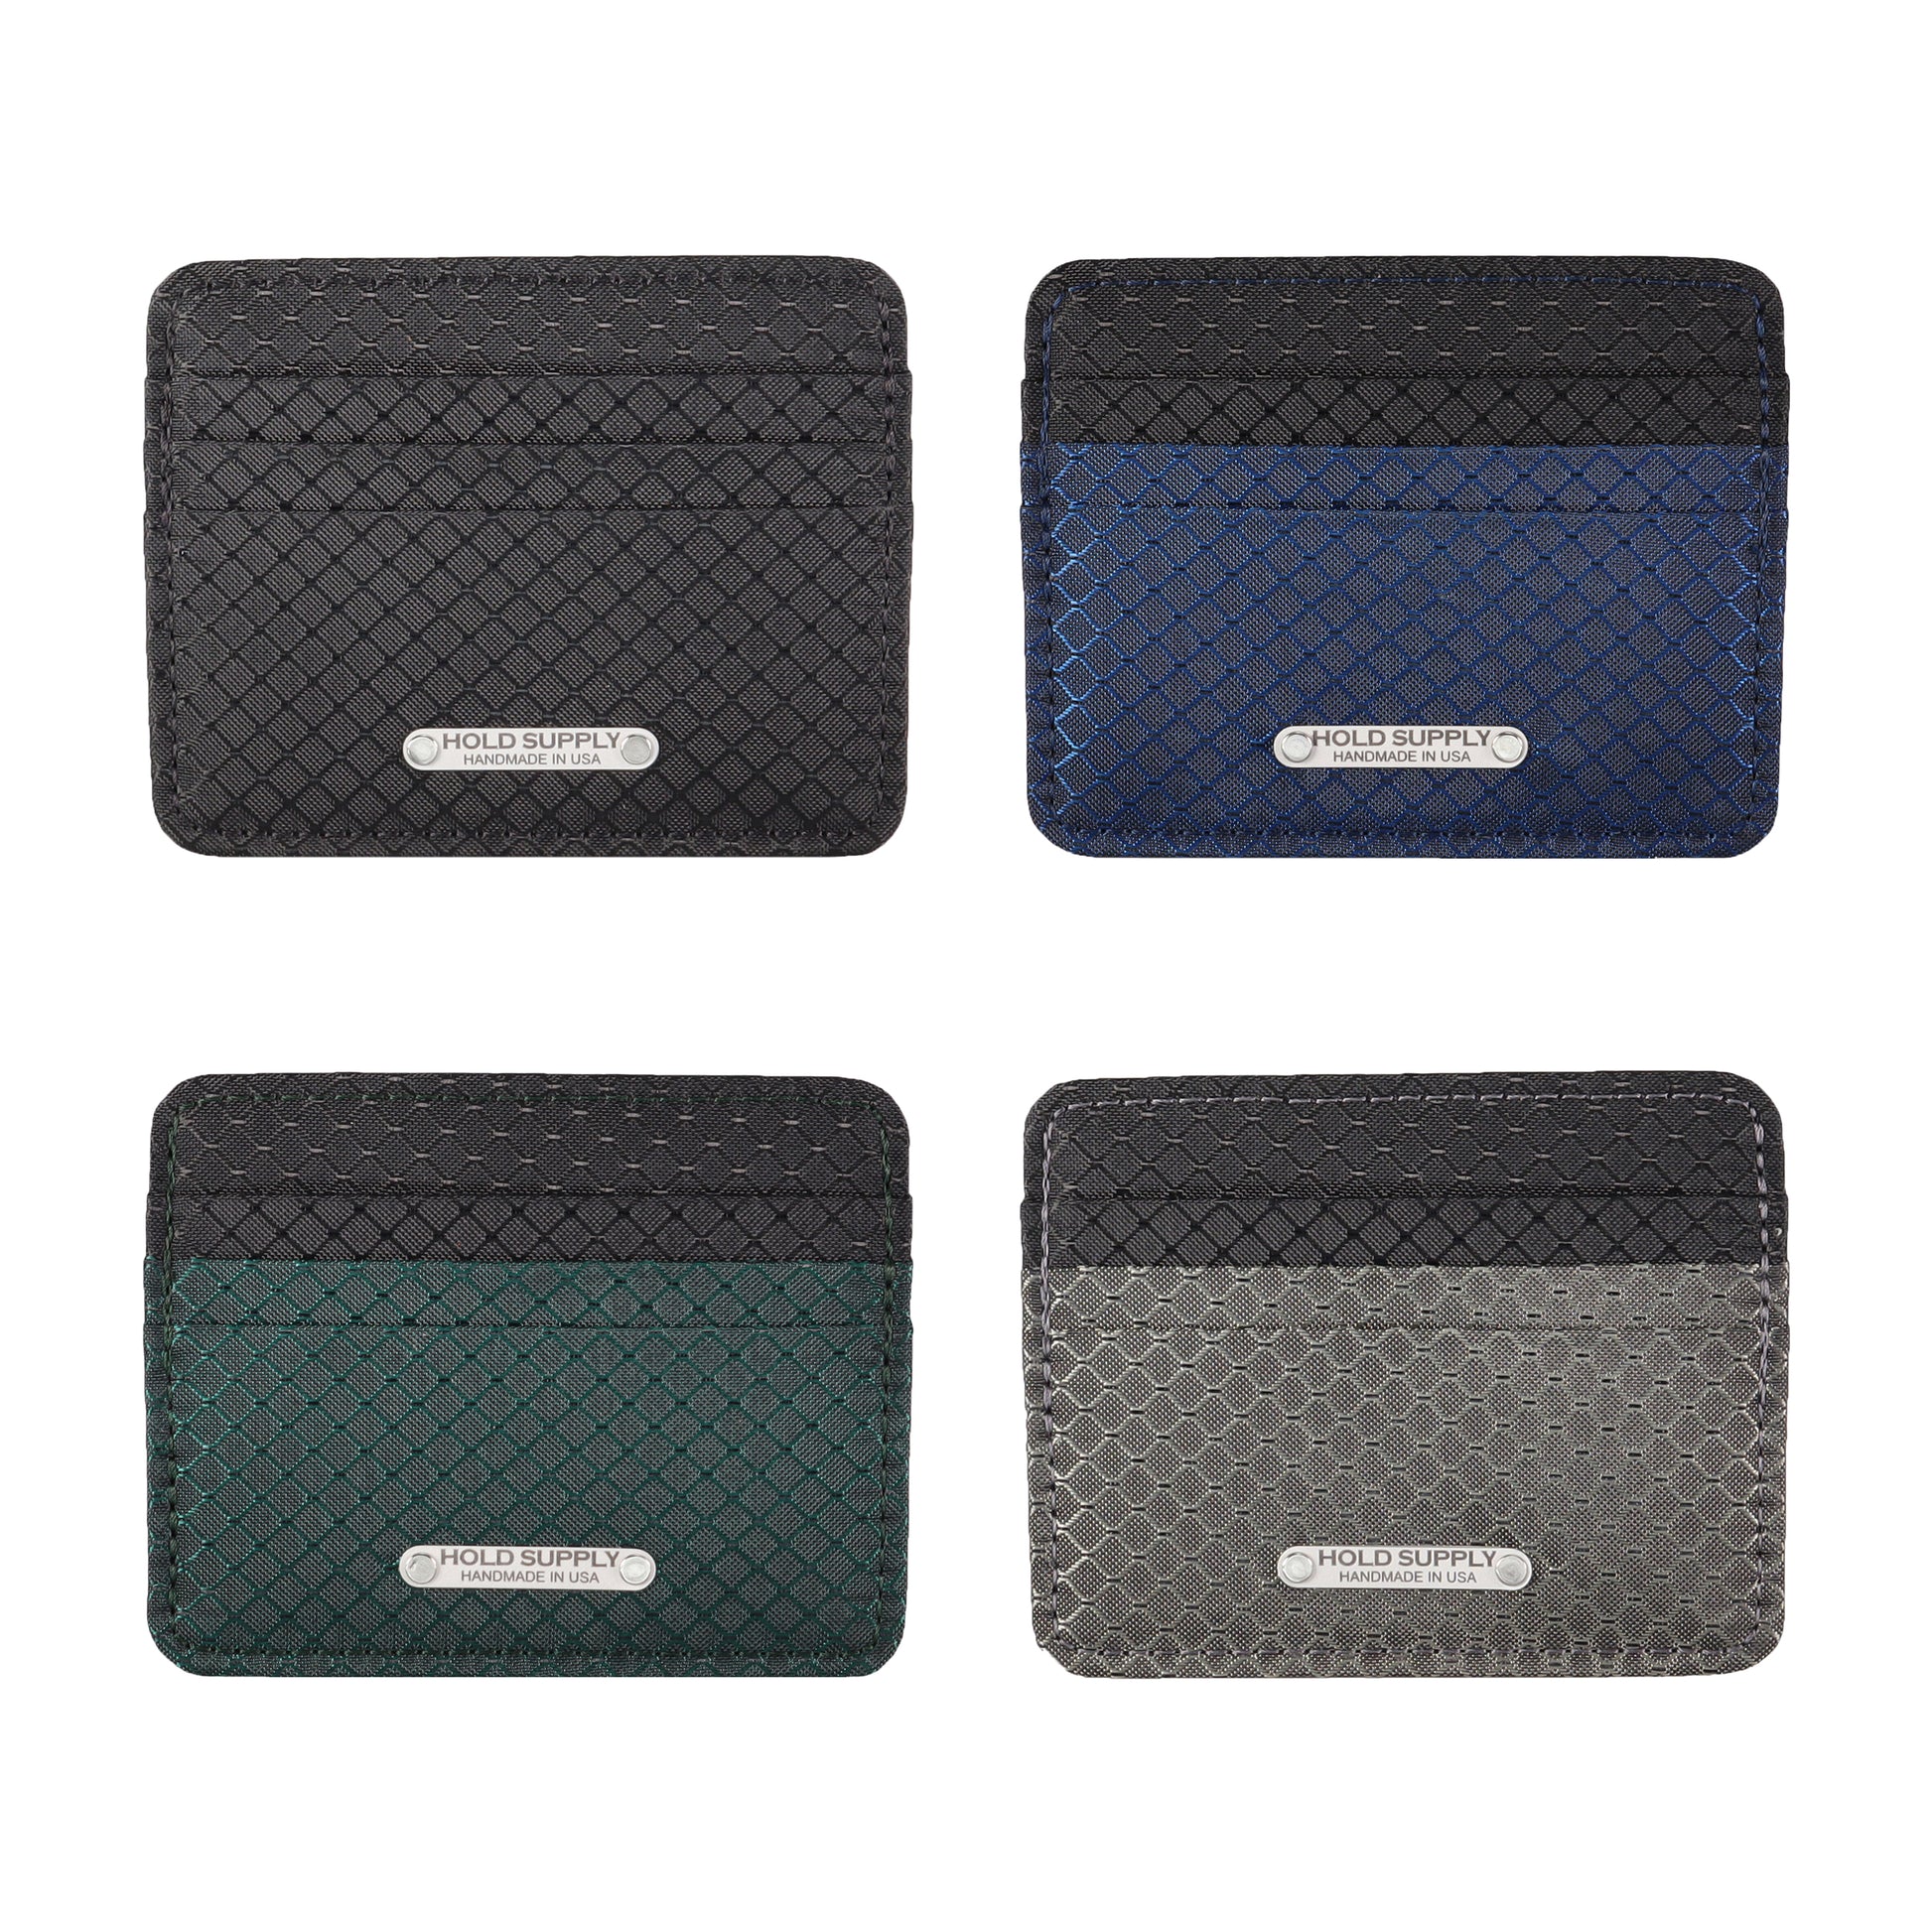 Green and Black Ripstop Card Holder Wallet